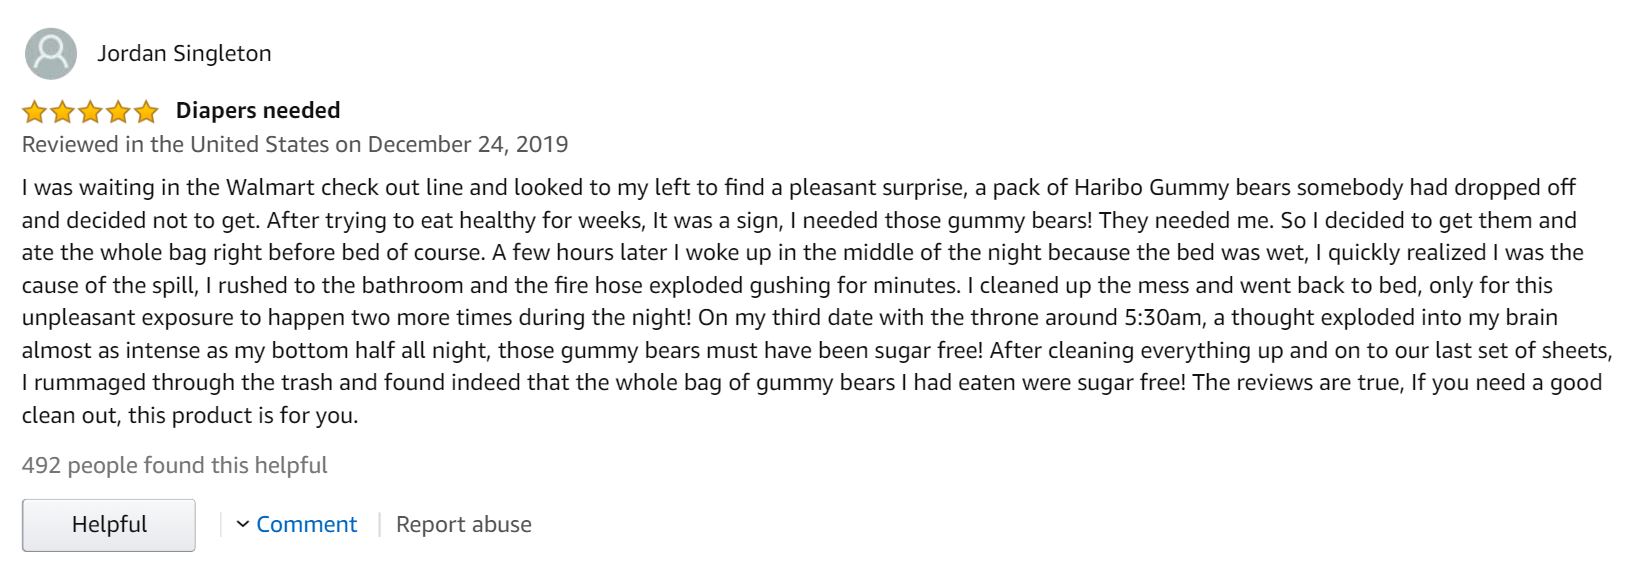 Amazon reviews for Haribo's Sugar-Free Gummi Bears are the most brutal  we've come across